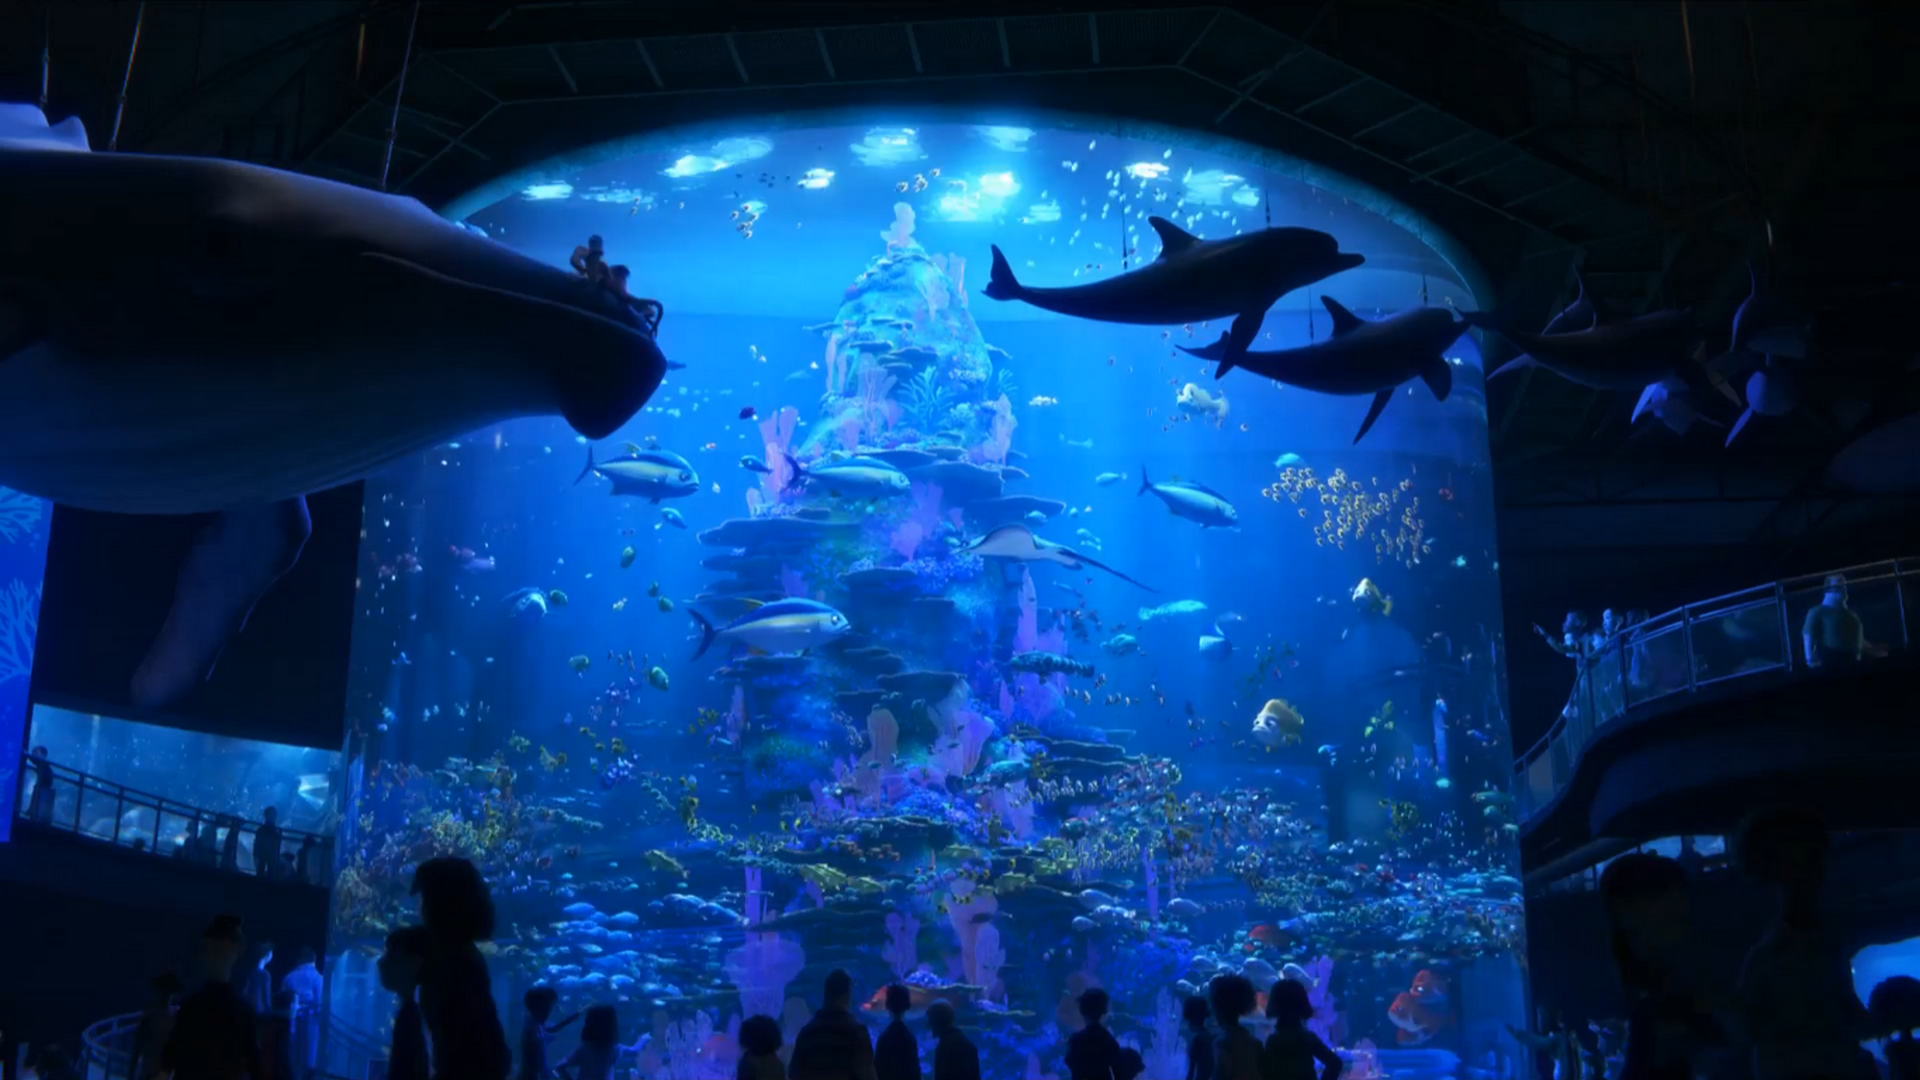 Image Finding Dory 41.png Disney wiki FANDOM powered by Wikia